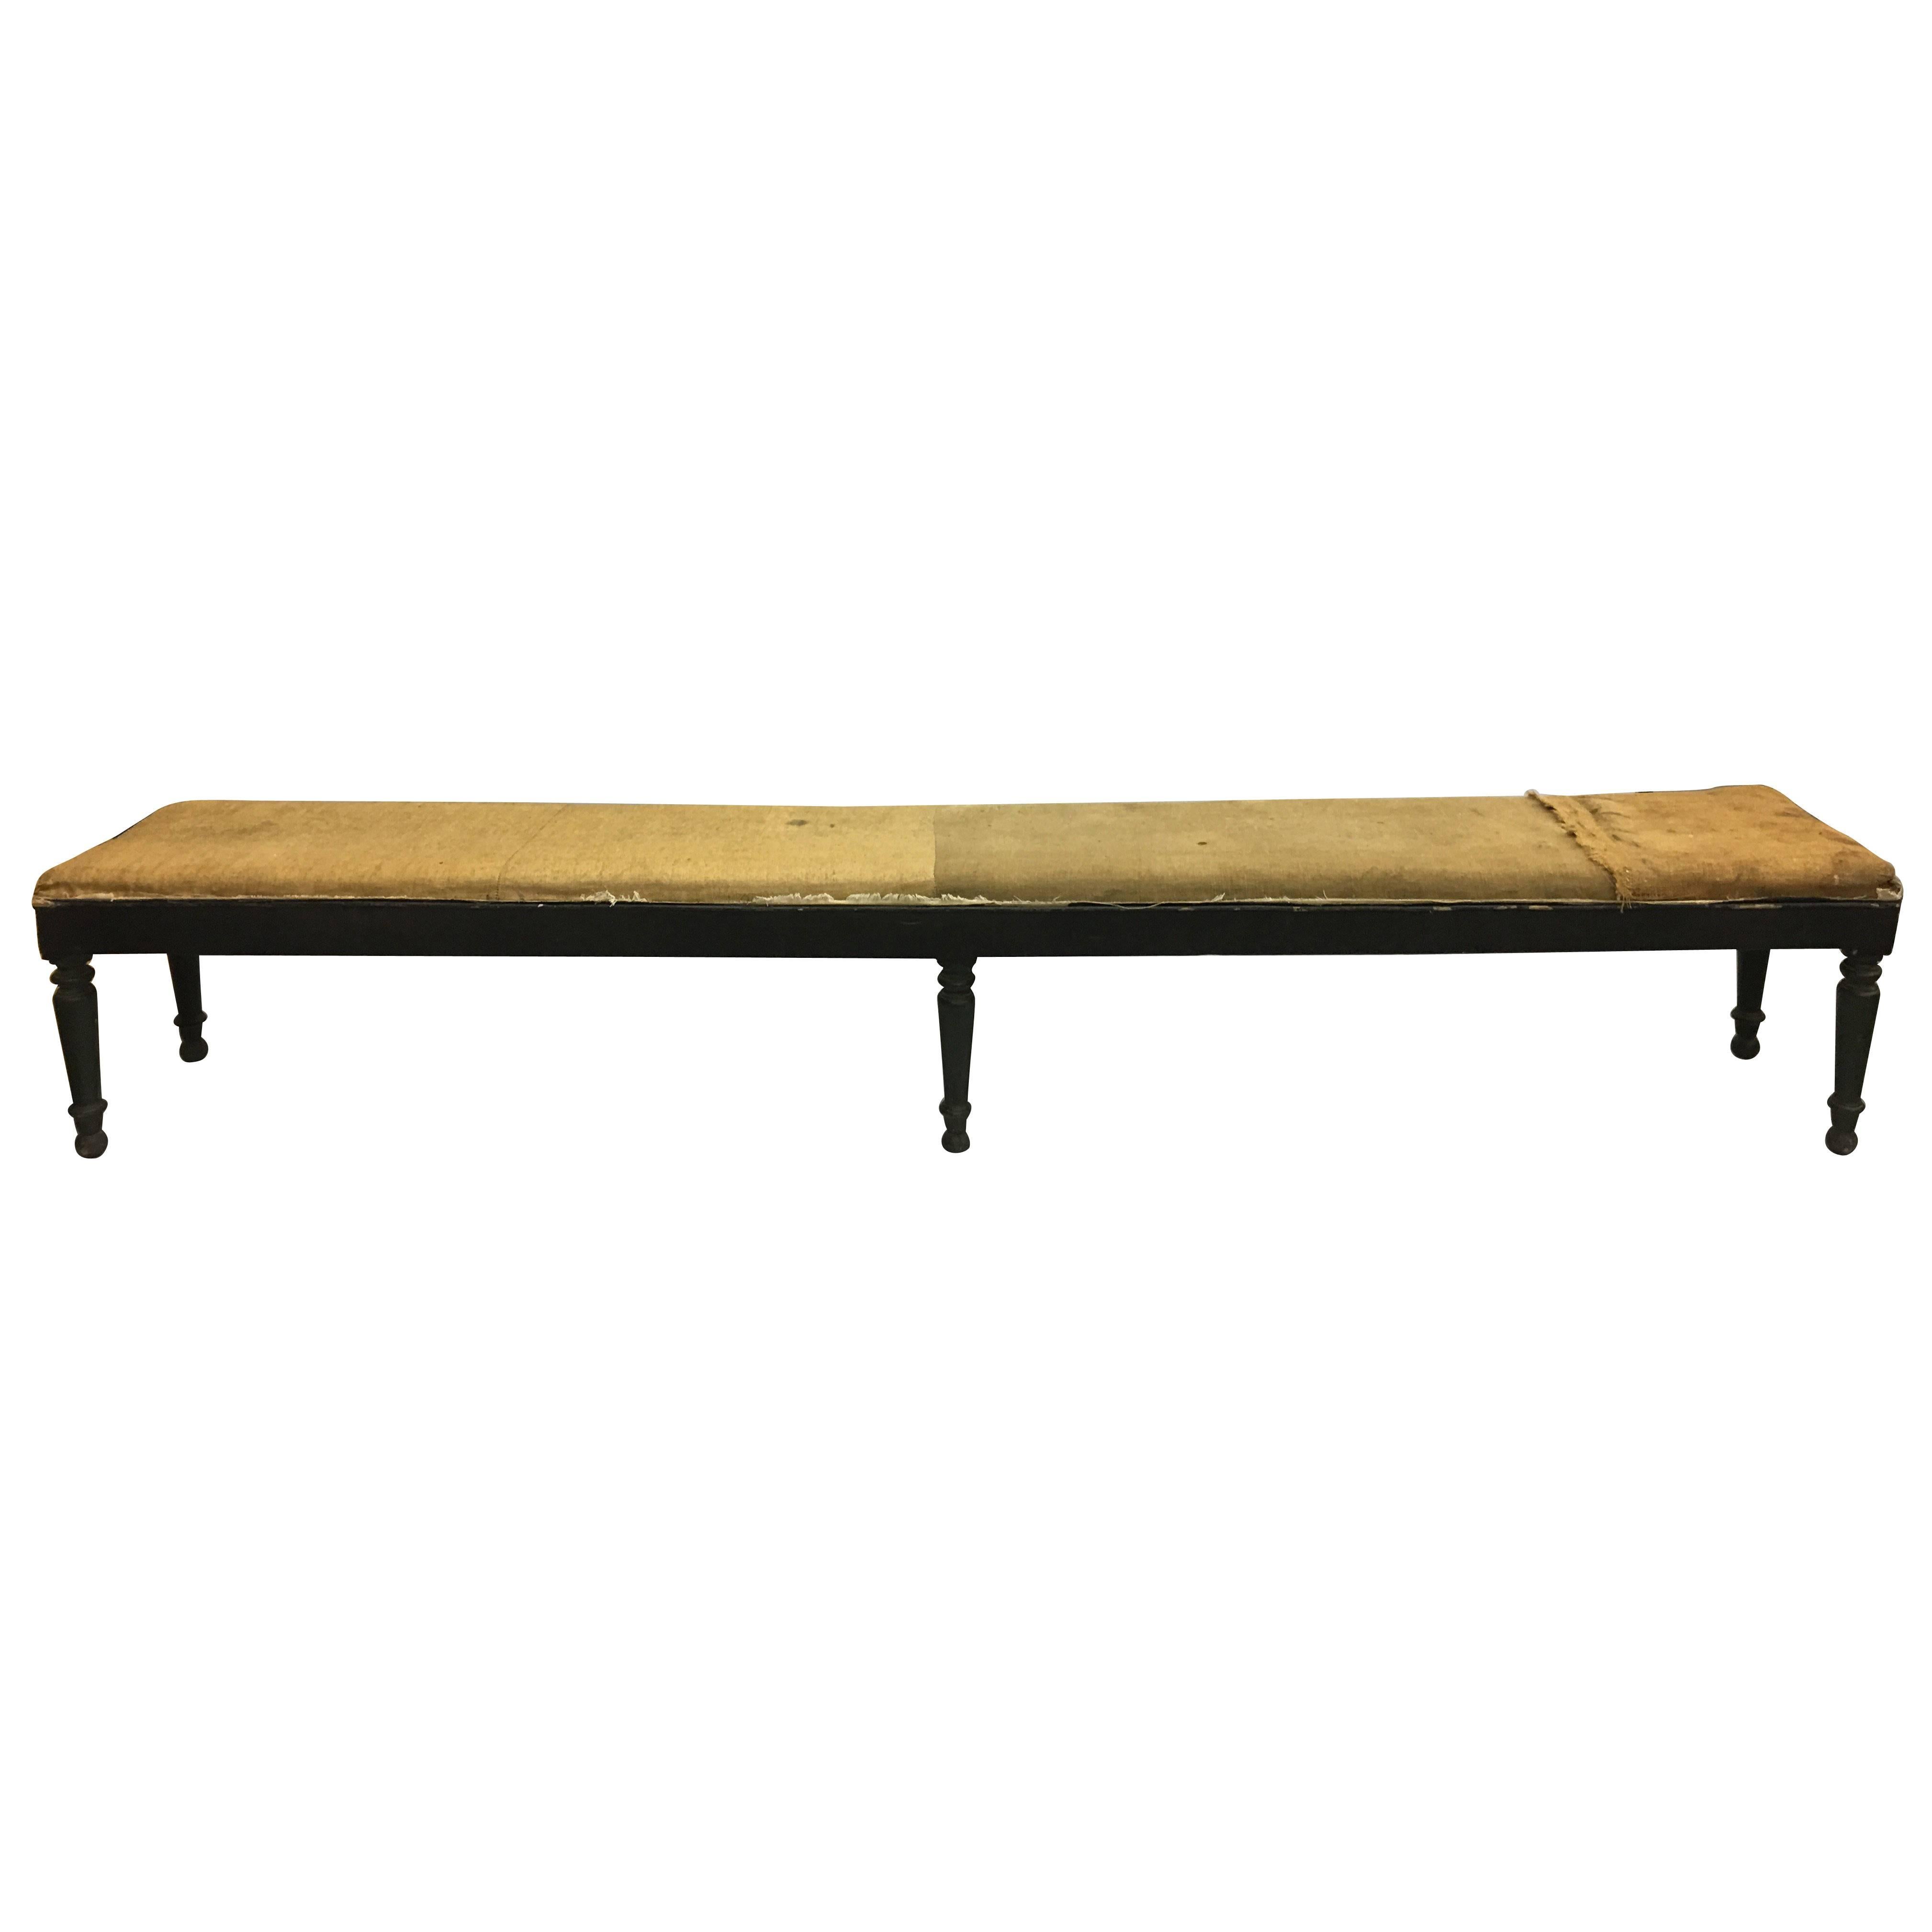 Very Large, Sober 19th Century Napoleon III 9' Foot Hall Bench, France, 1860